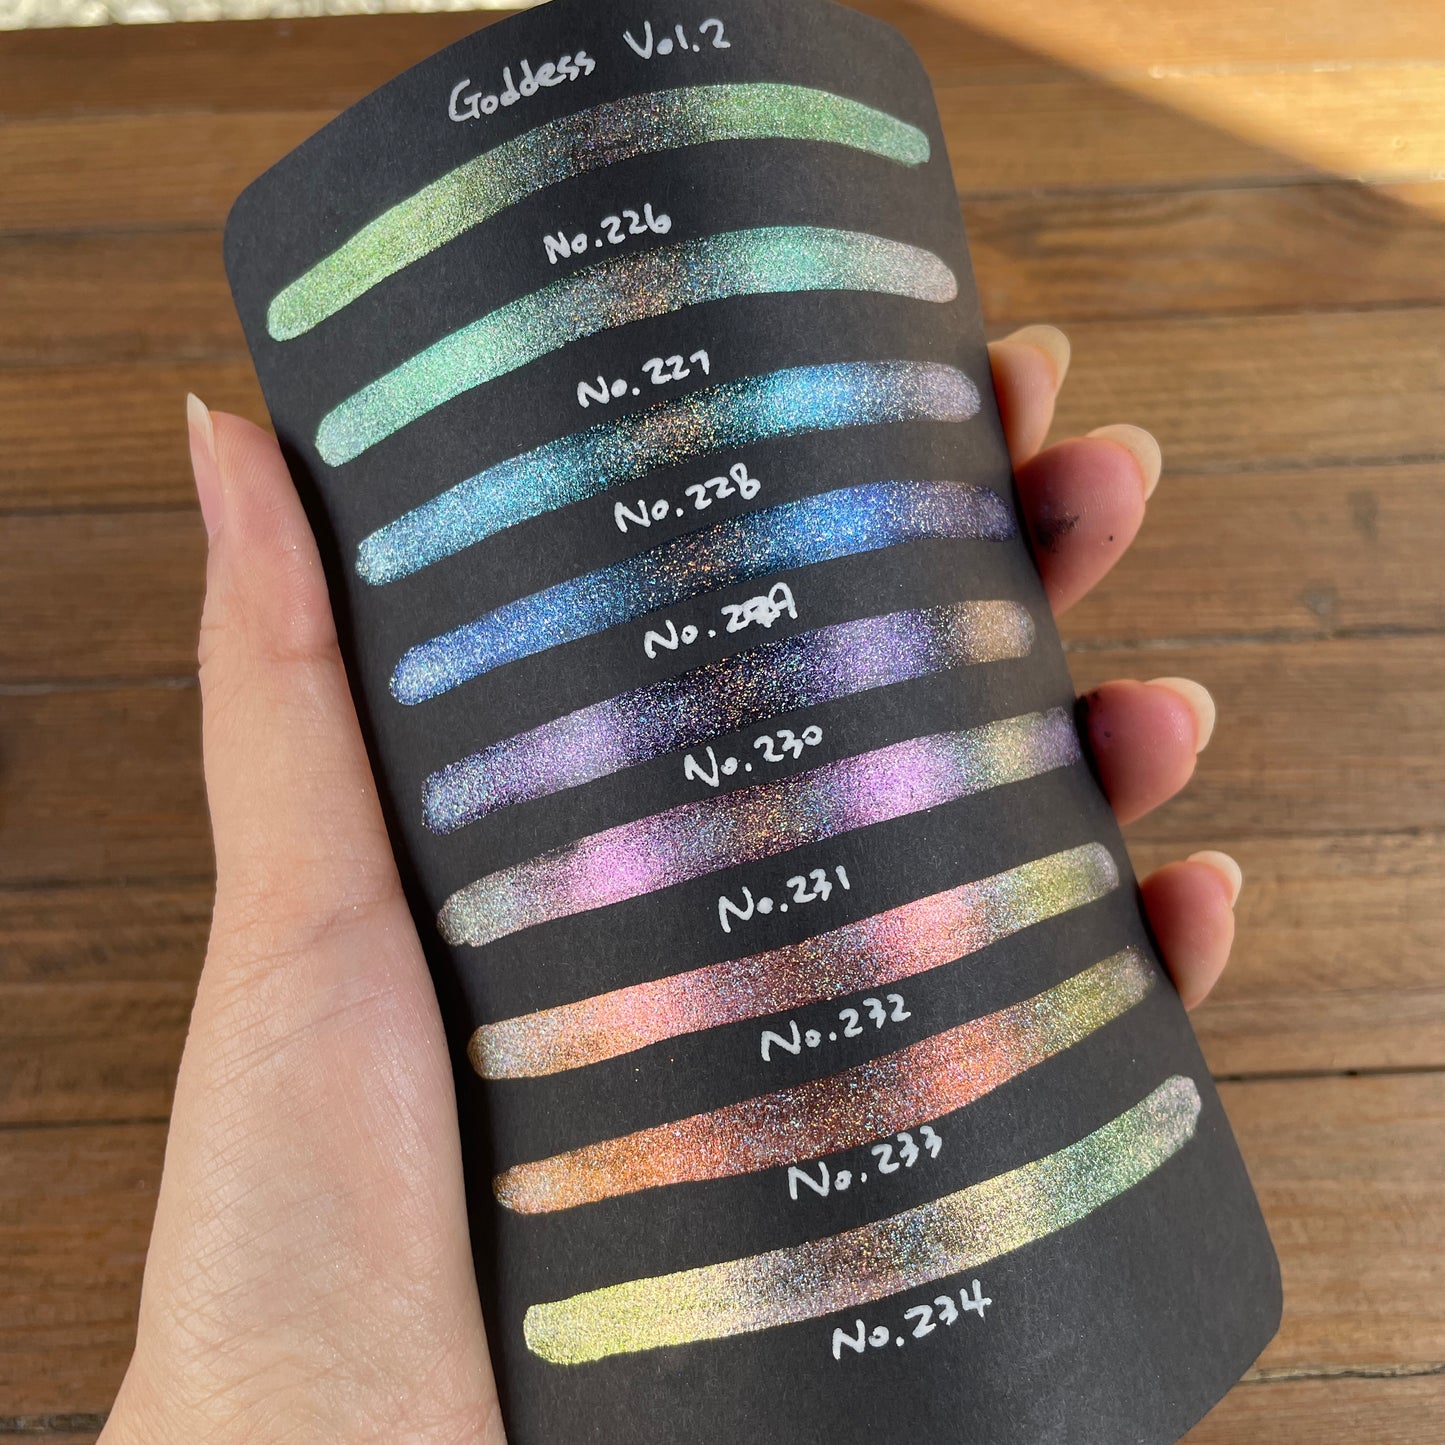 Limited No.233 Vol.2 Goddess Handmade Super Shift Aurora Shimmer Holographic Watercolor Paints by iuilewatercolors